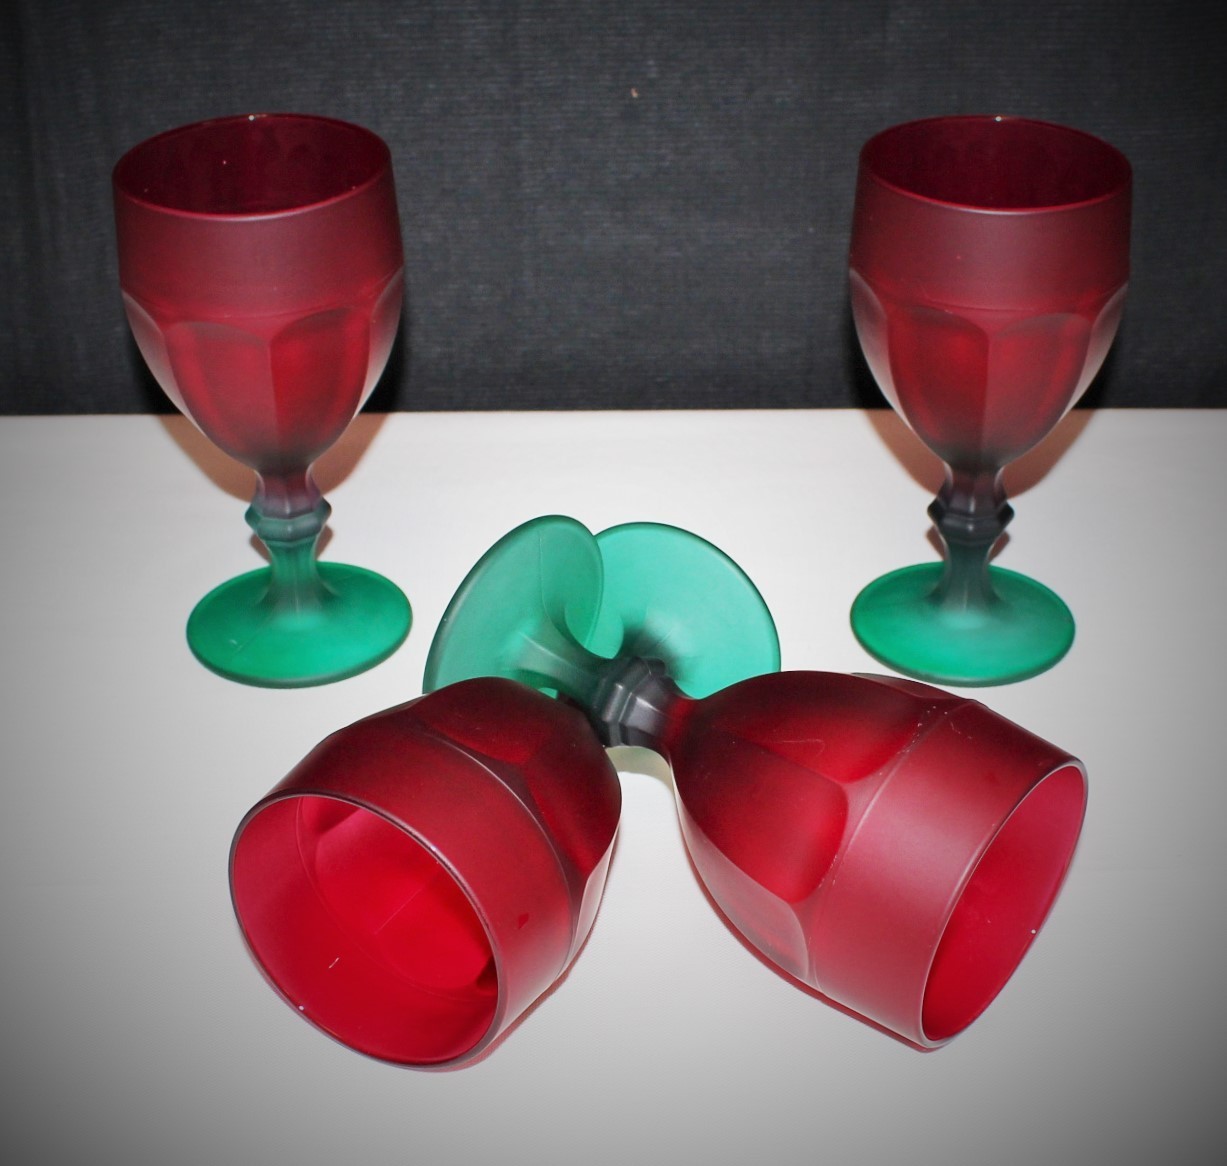 Set of 4 Libbey Duratuff Frosted Red/Green Satin Finish 6 3/4" Stem Glass Goblets